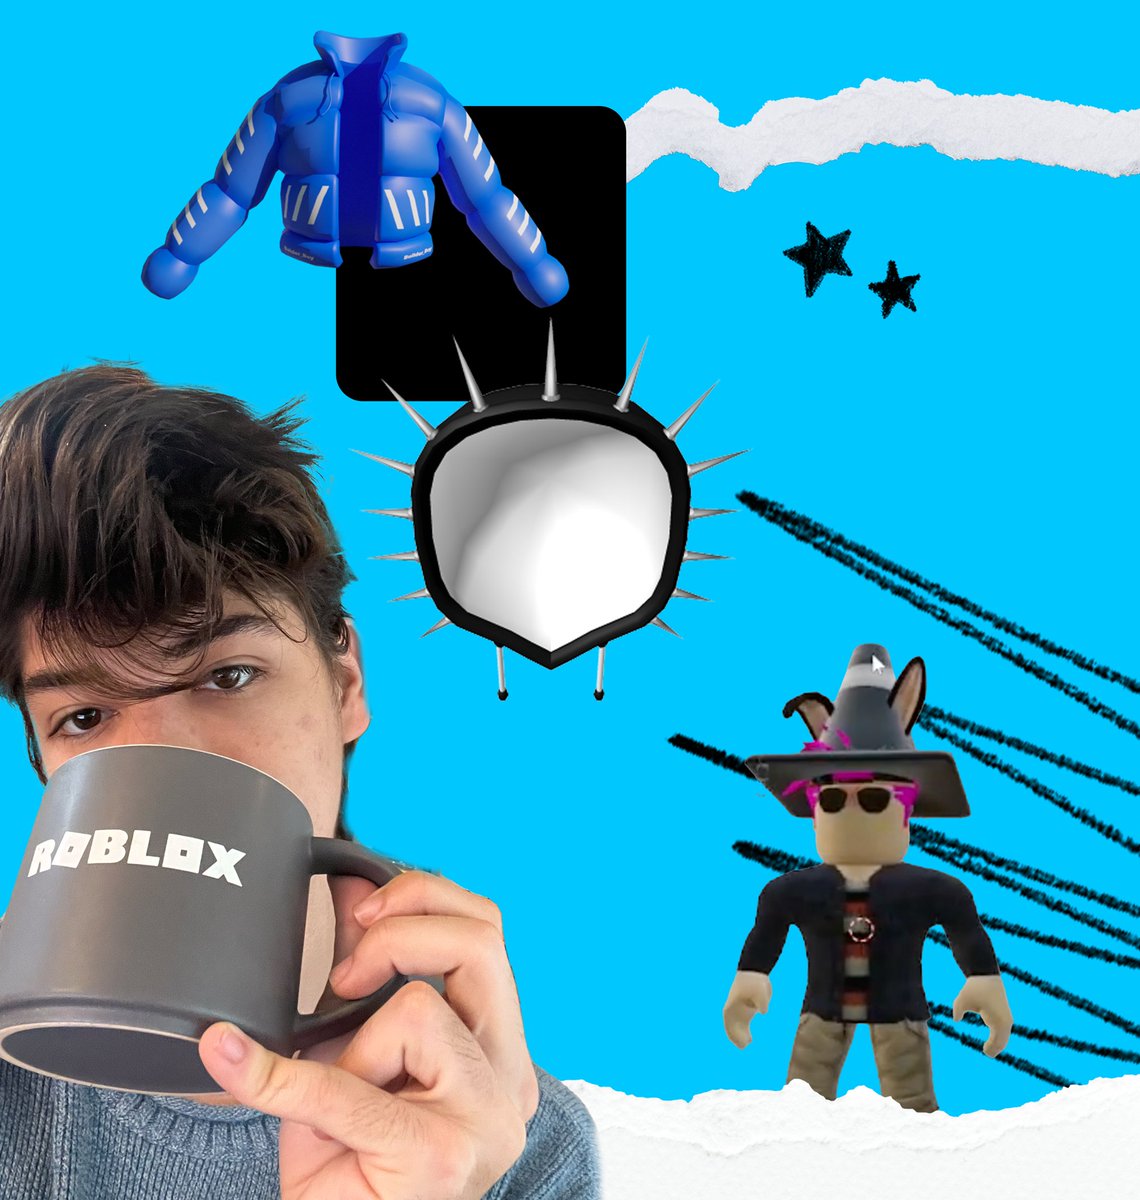 Roblox on X: So much fun! Thanks for joining me to learn what it's like  creating fashion my way. Look at the world through inspired eyes and build  what you see!  /